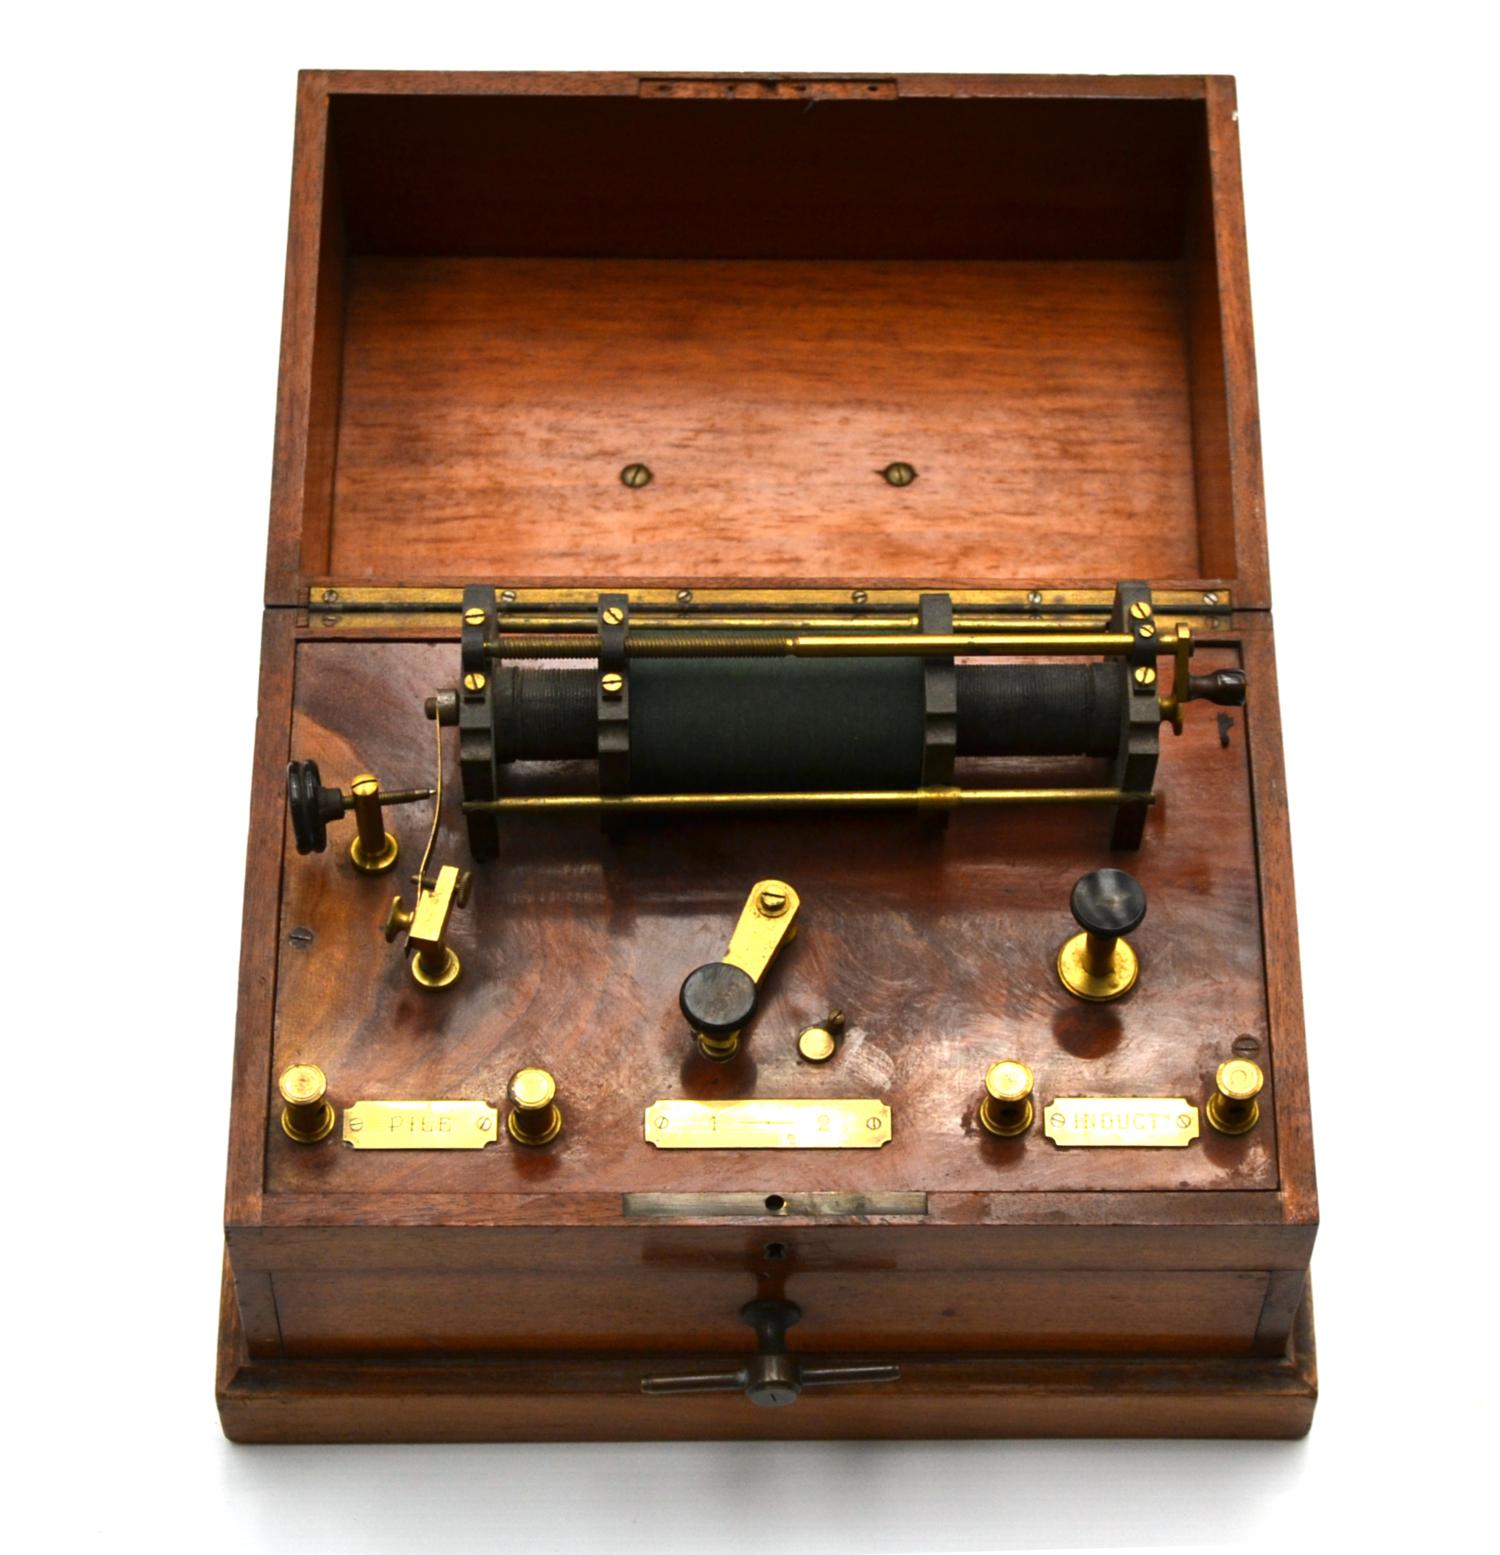 French Electric Shock Machine with variable solenoid, with brass fitting and plaques on wooden